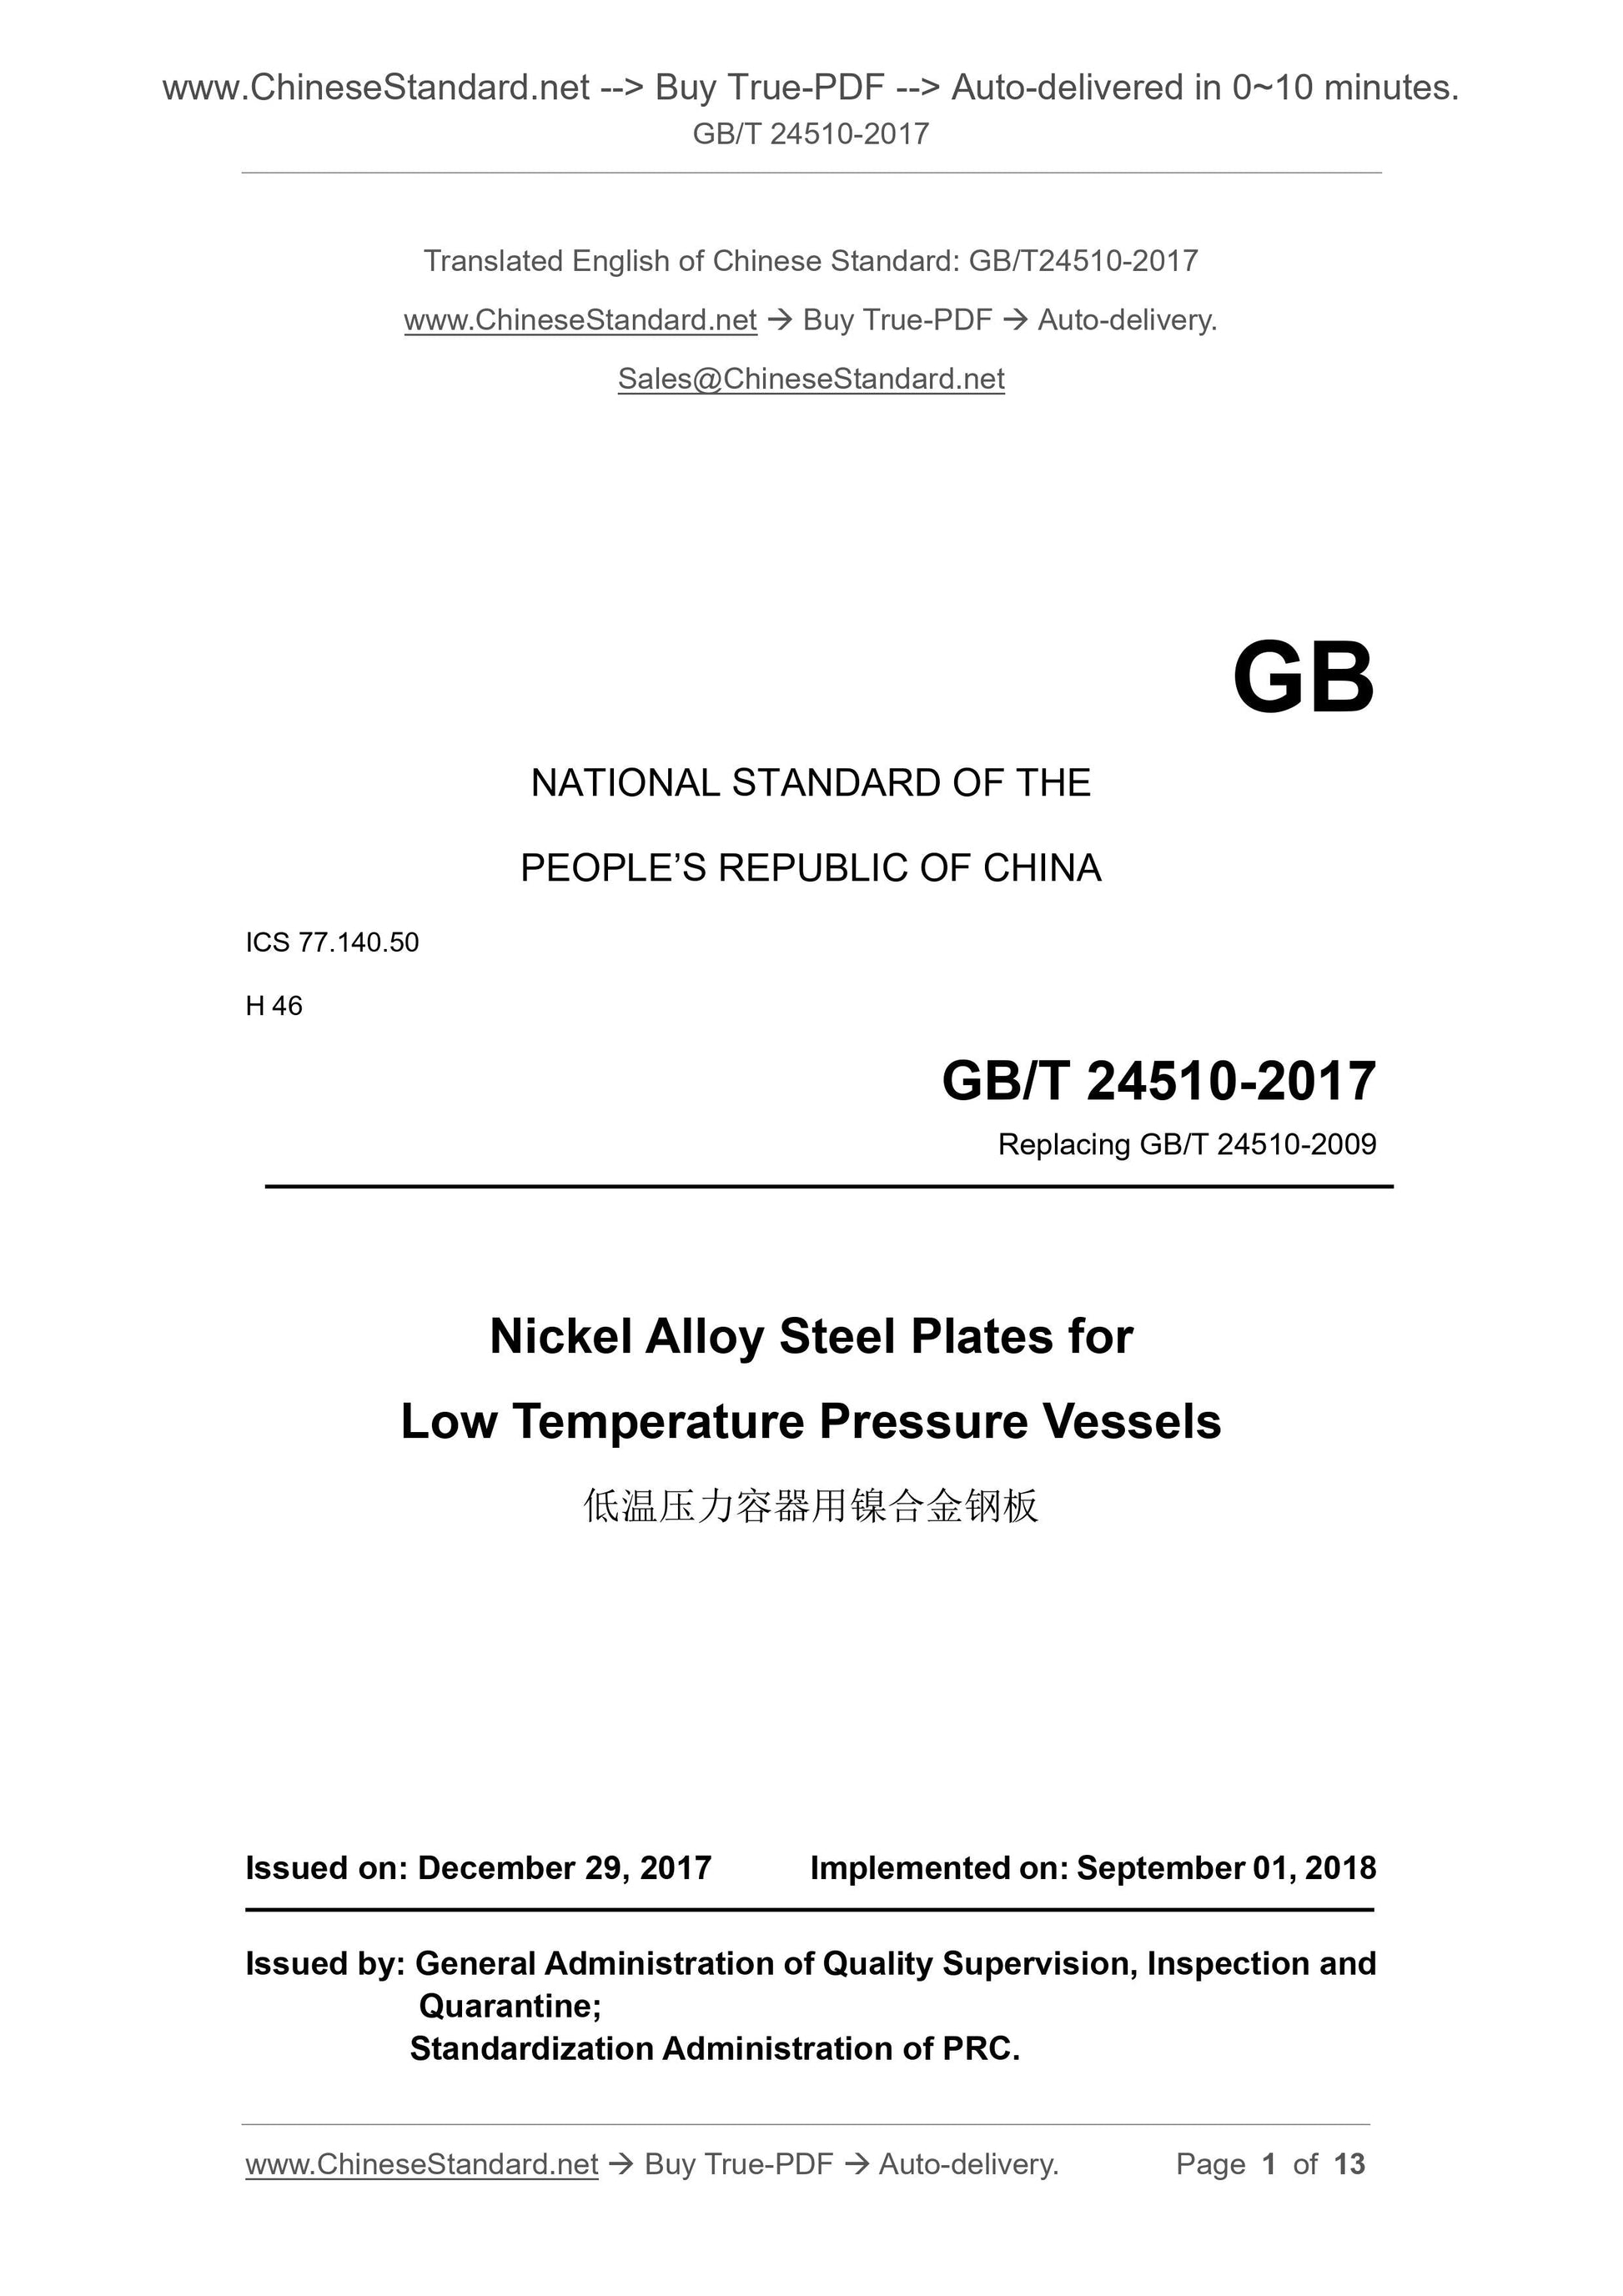 GB/T 24510-2017 Page 1